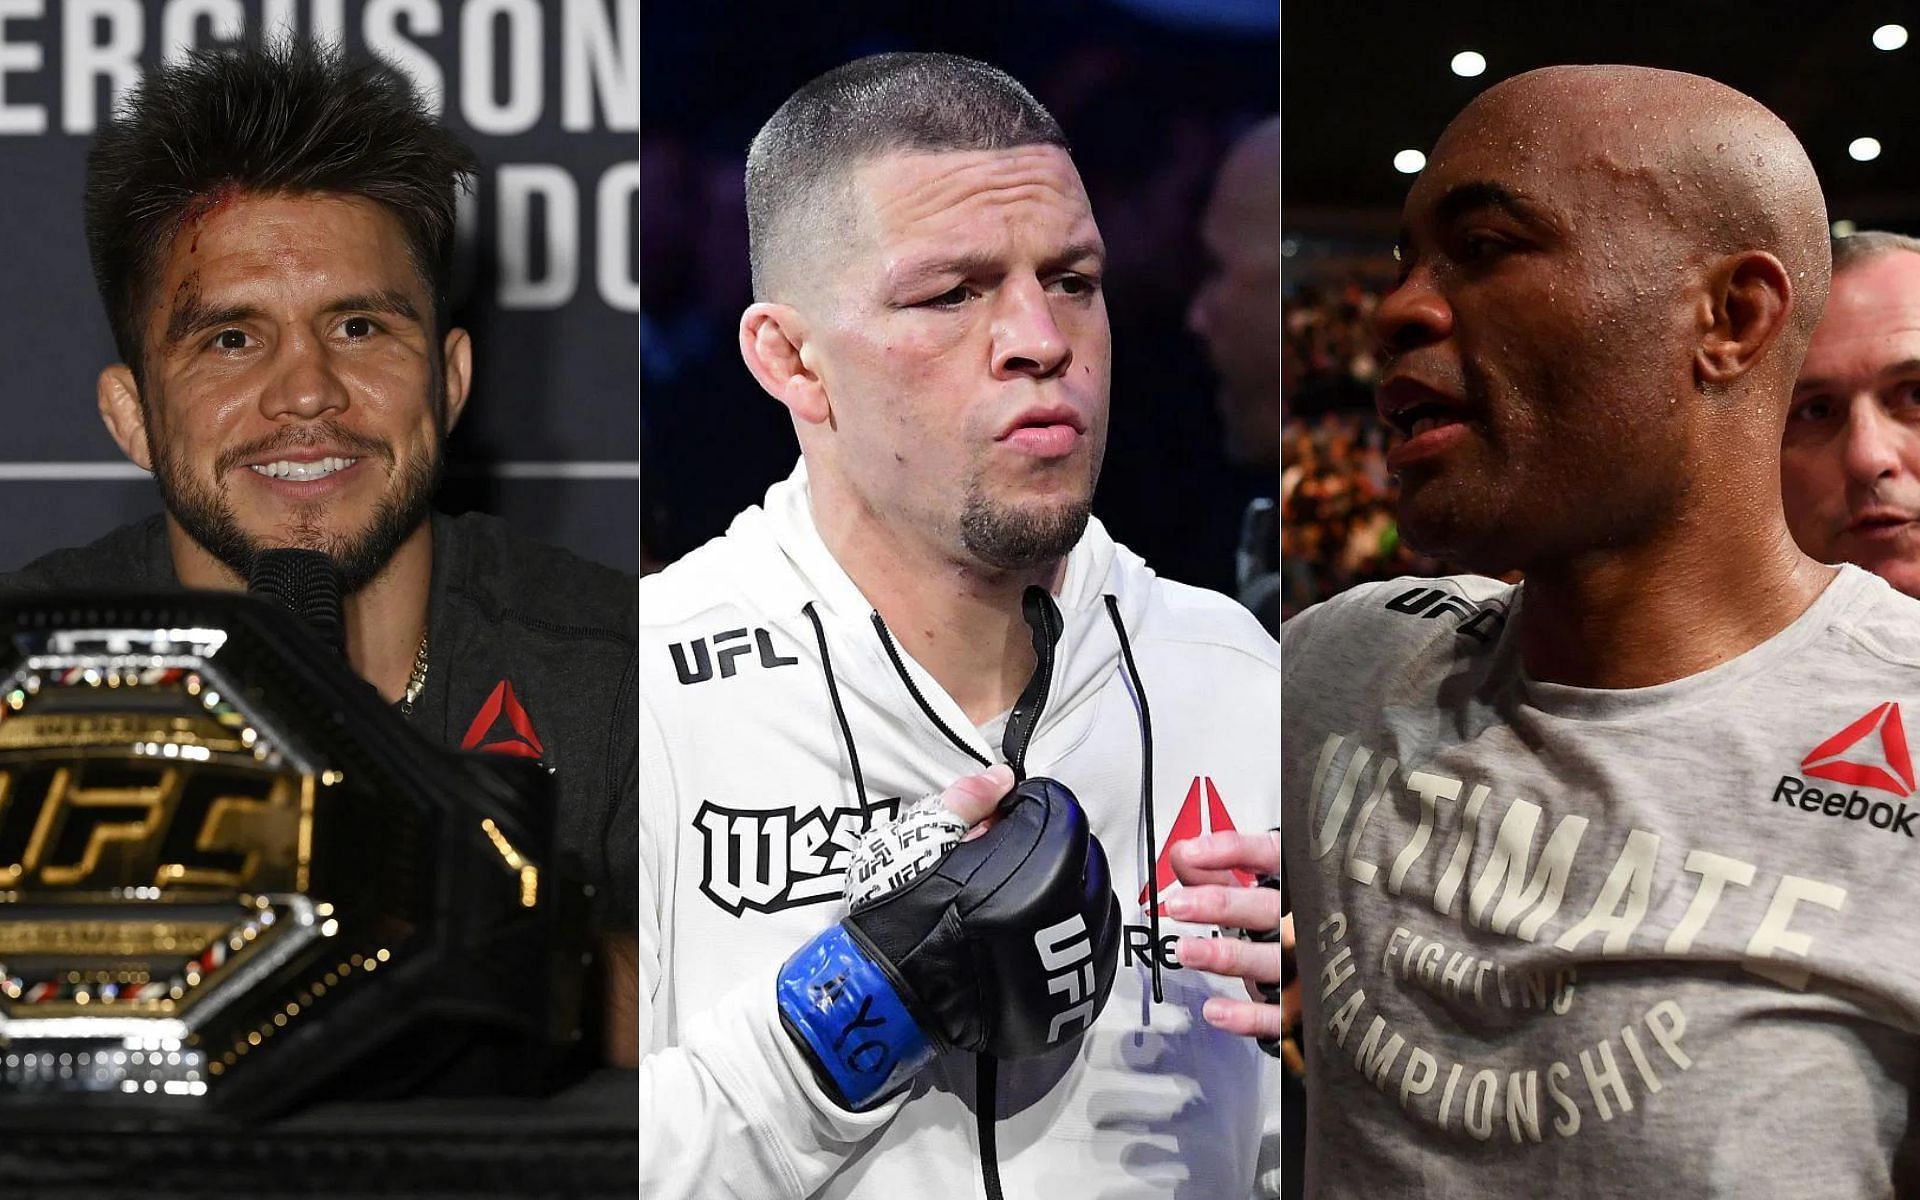 Henry Cejudo (left), Nate Diaz (middle) and Anderson Silva (right)